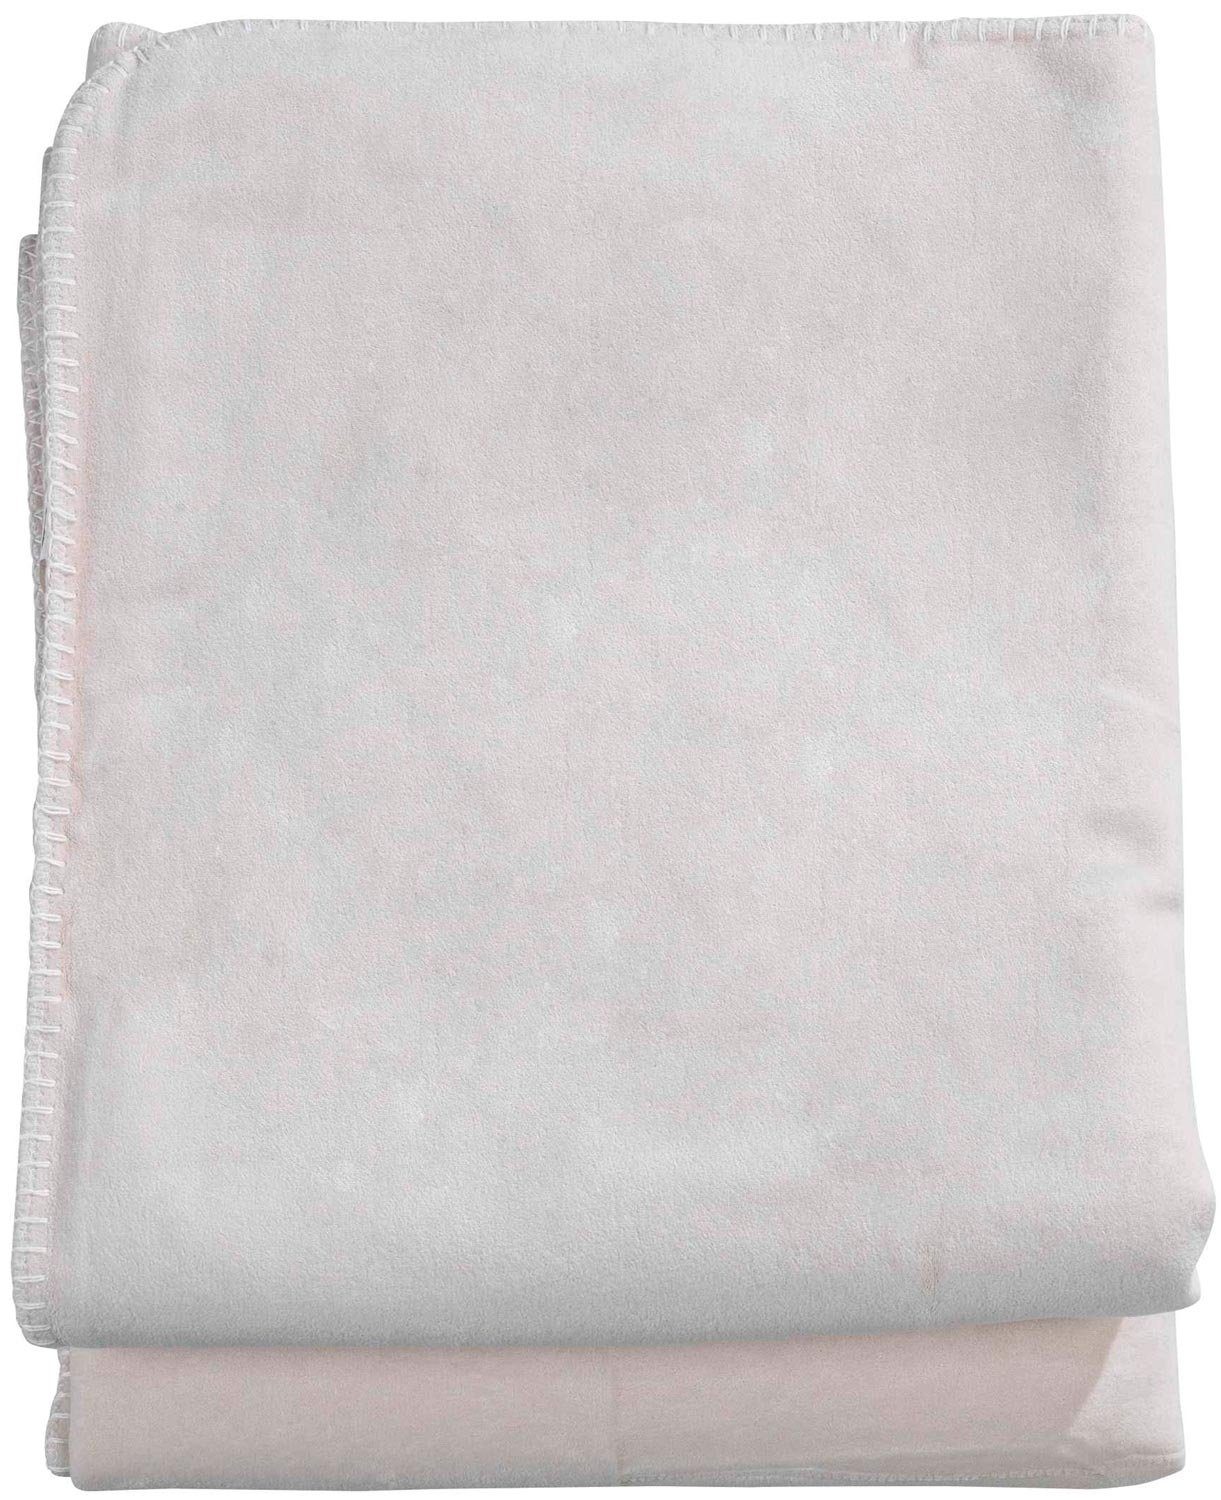 Polyester, 150 Supersoft Home4You, Velours Wohndecke, x cm, 200 Beige,